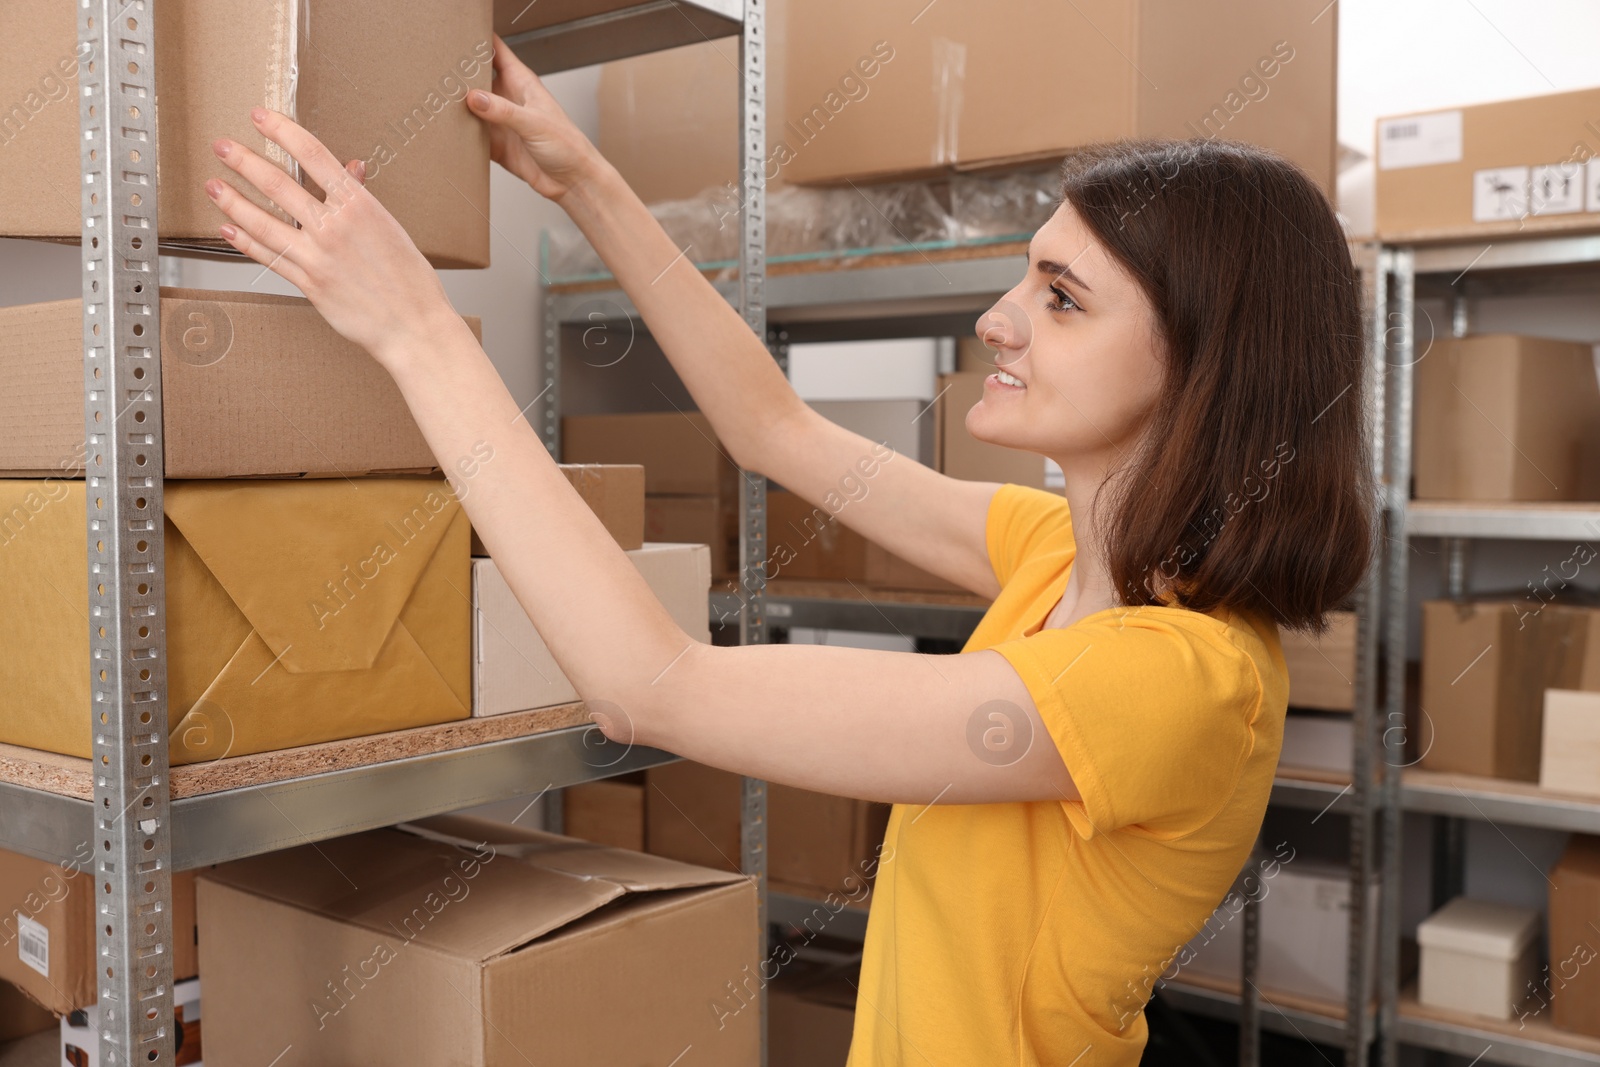 Photo of Post office worker putting box on rack with parcels indoors